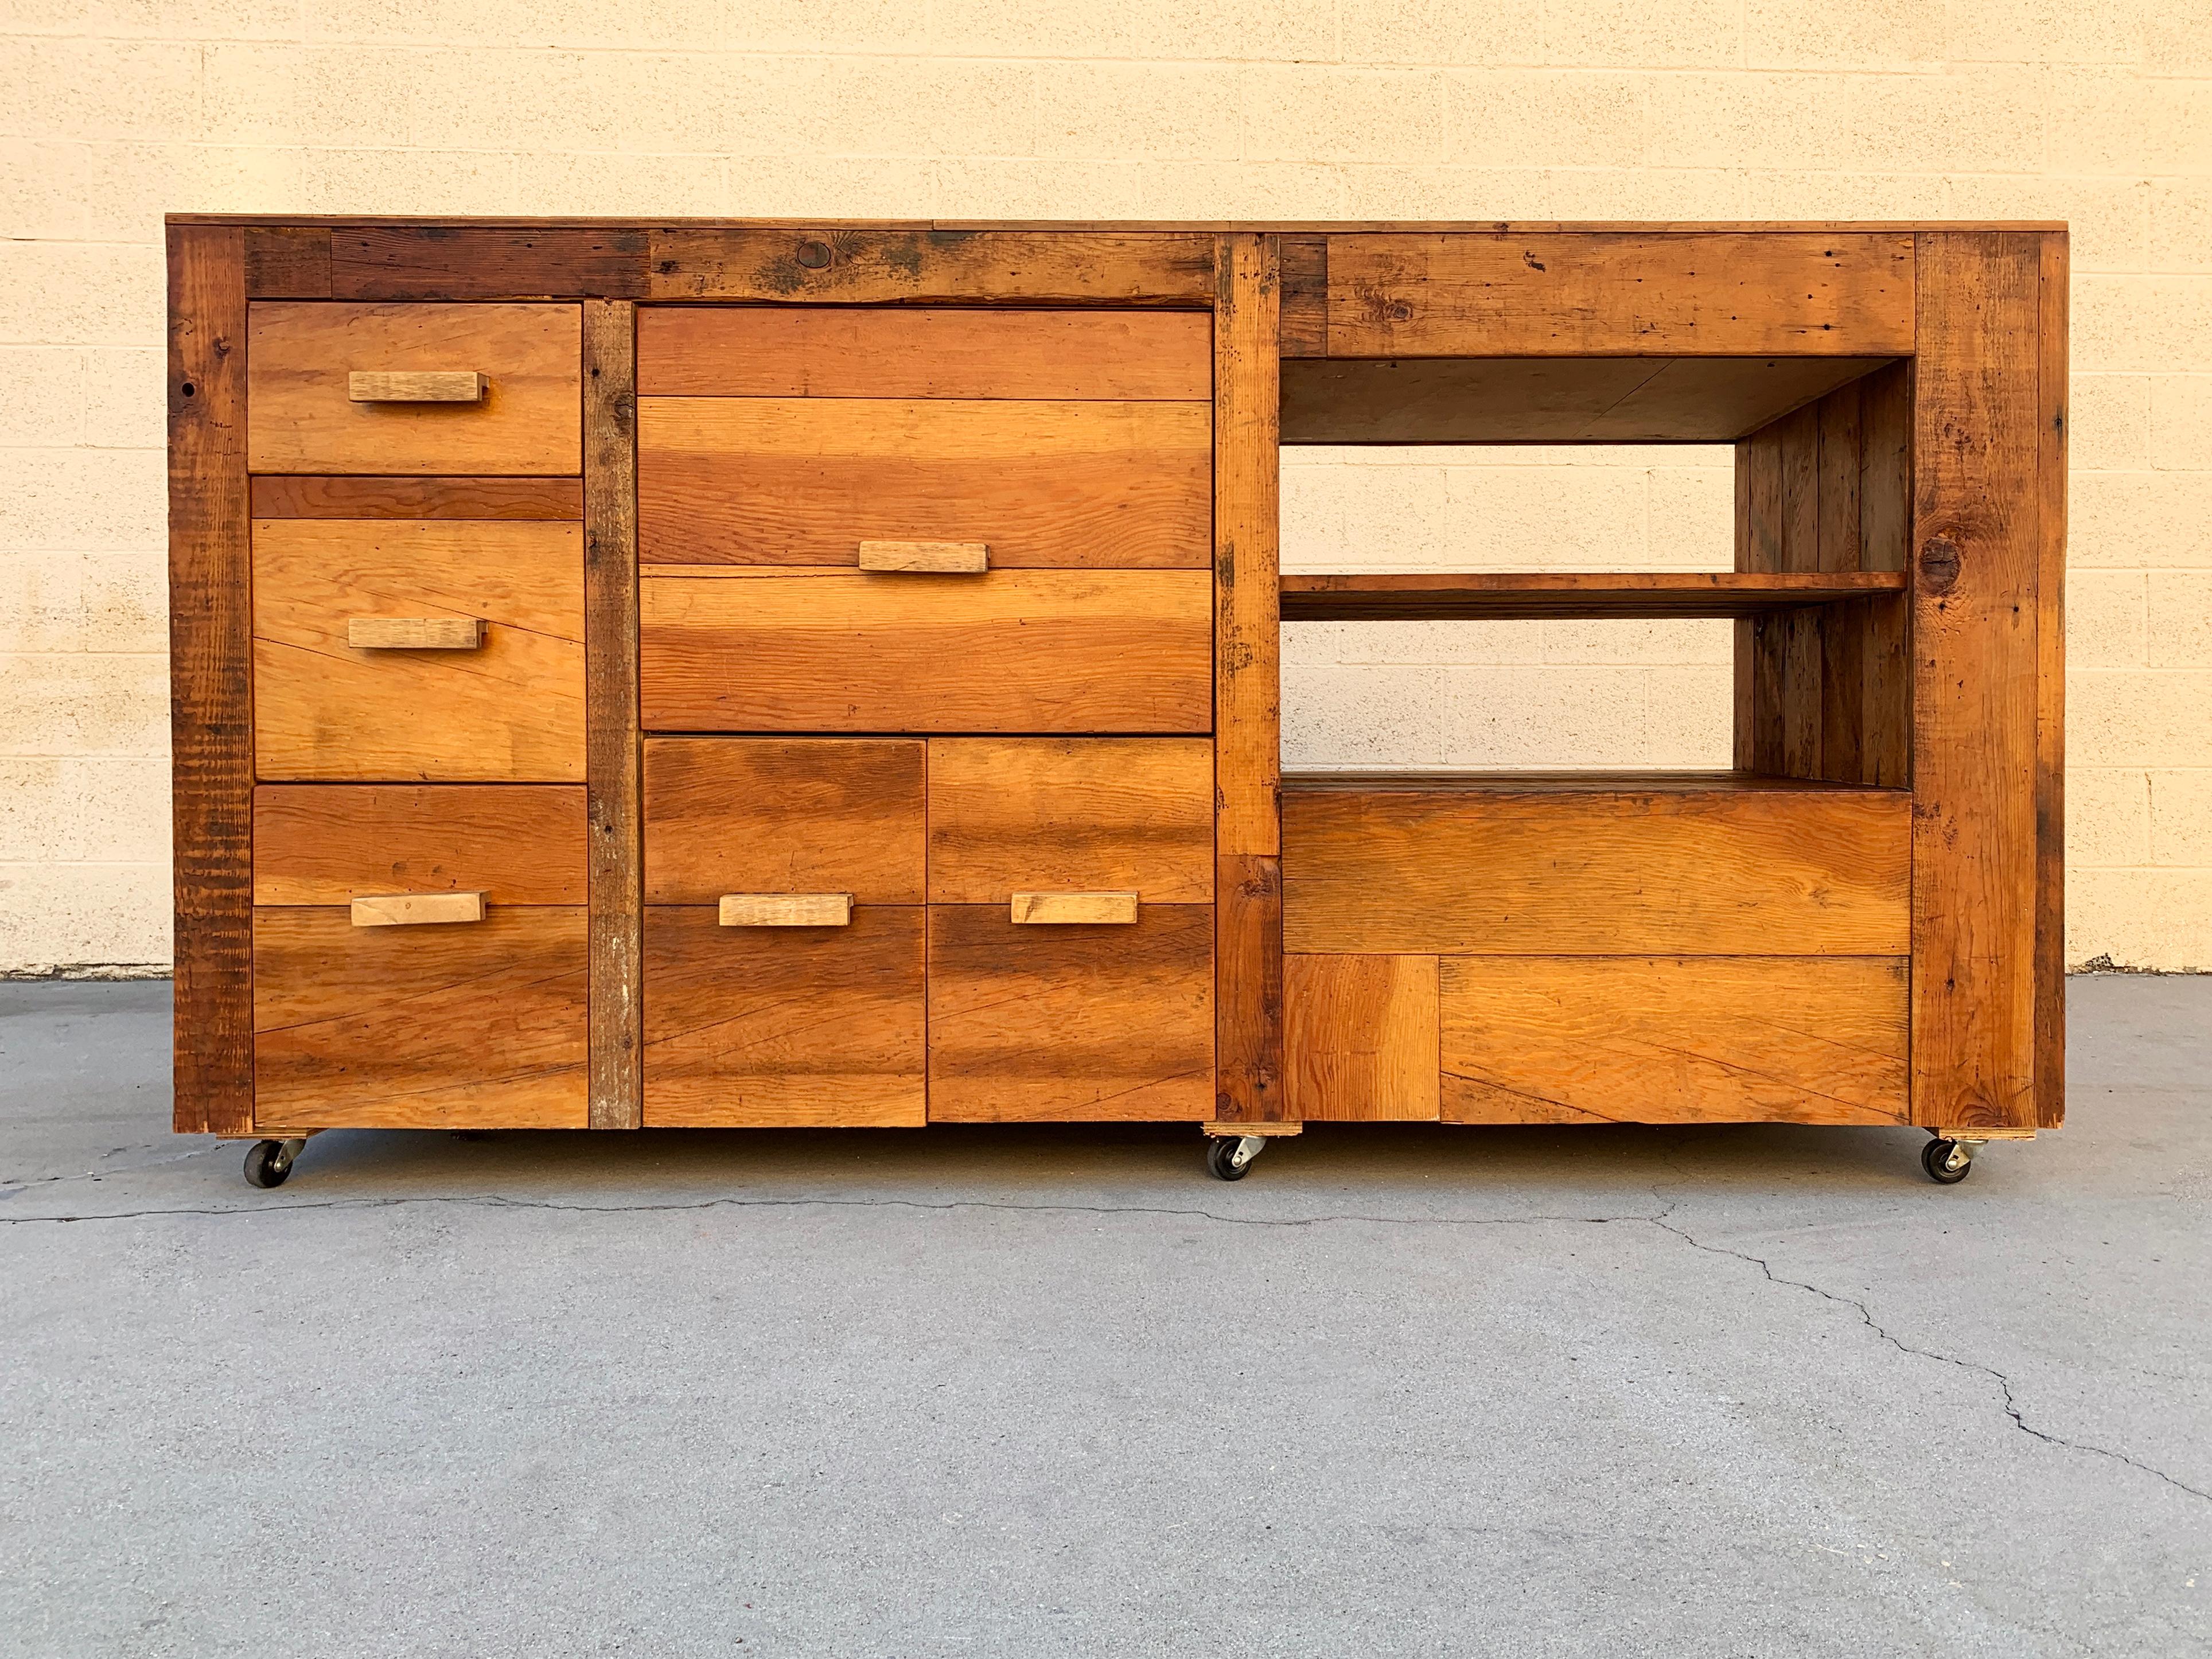 Massive sales counter, work station or retail display, custom made with reclaimed barn wood. This beautiful, one of a kind piece features 6 drawers with wood handles, two shelves and rolls on casters. Great rustic styling; great patina.

Excellent